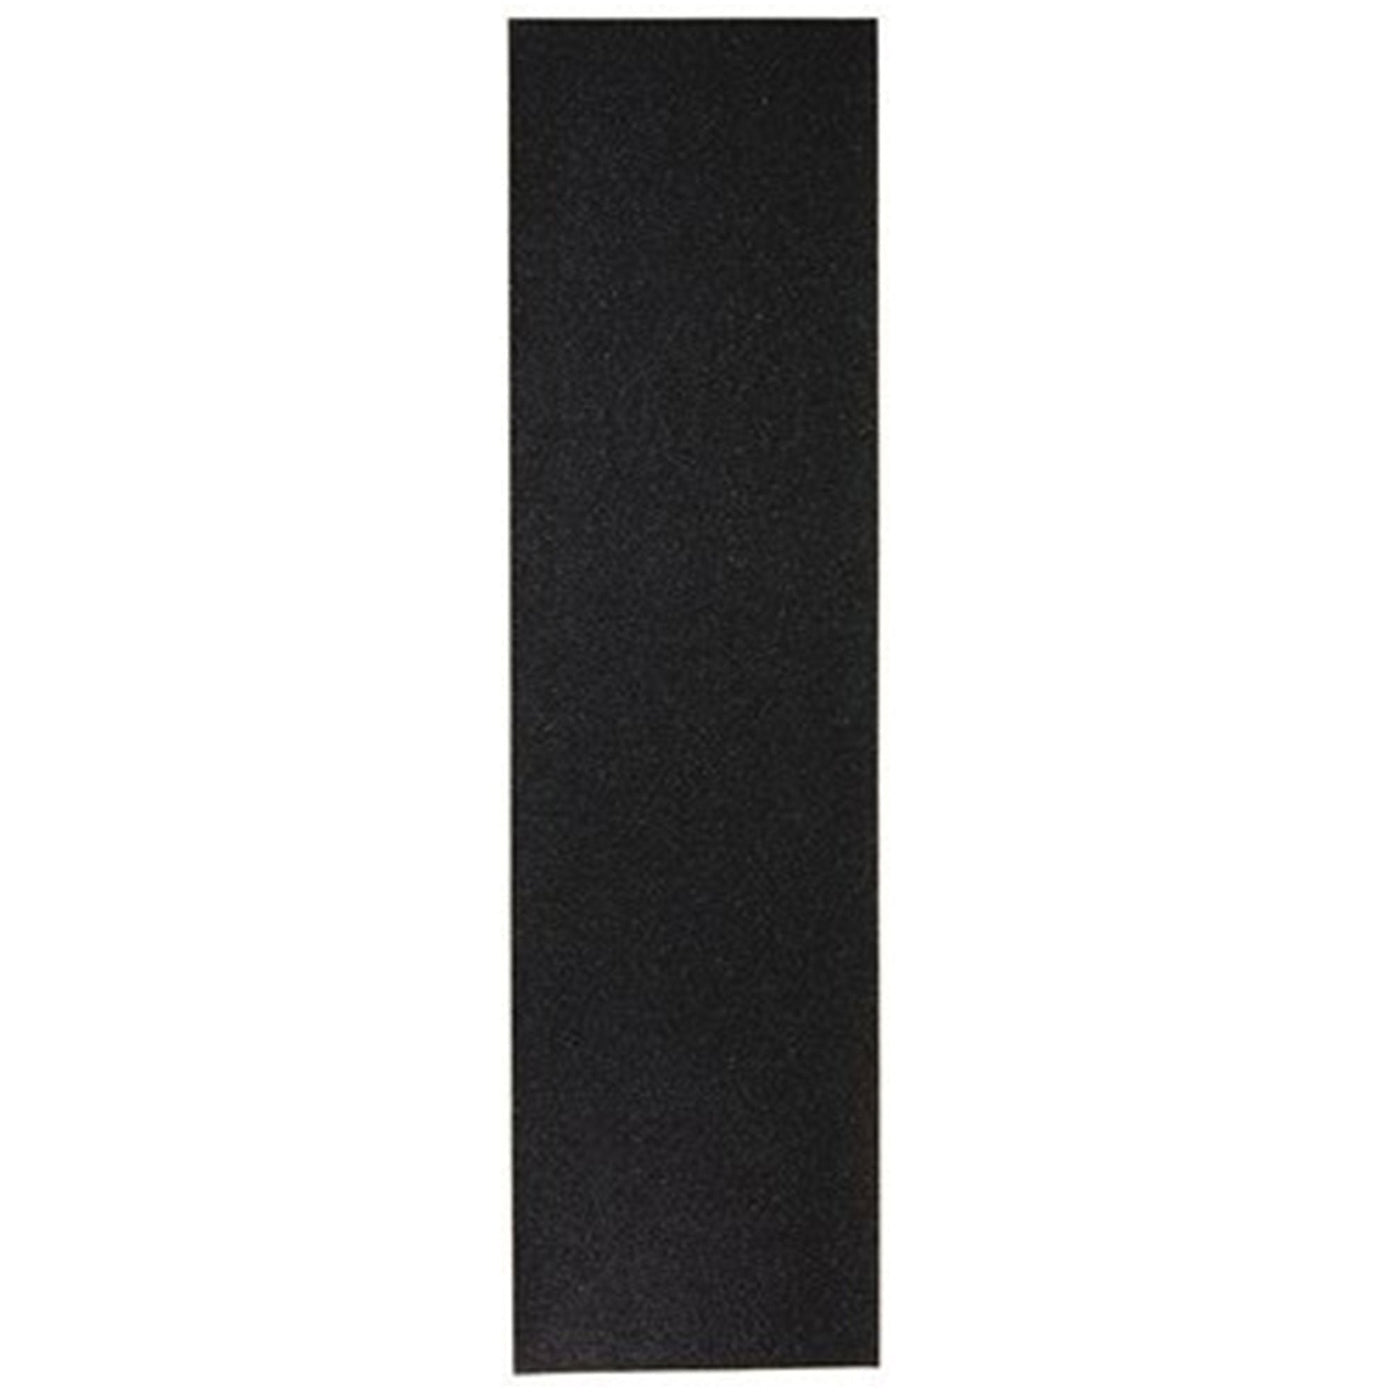 Core Scooter Grip Tape Black I Grip Tape Scooter